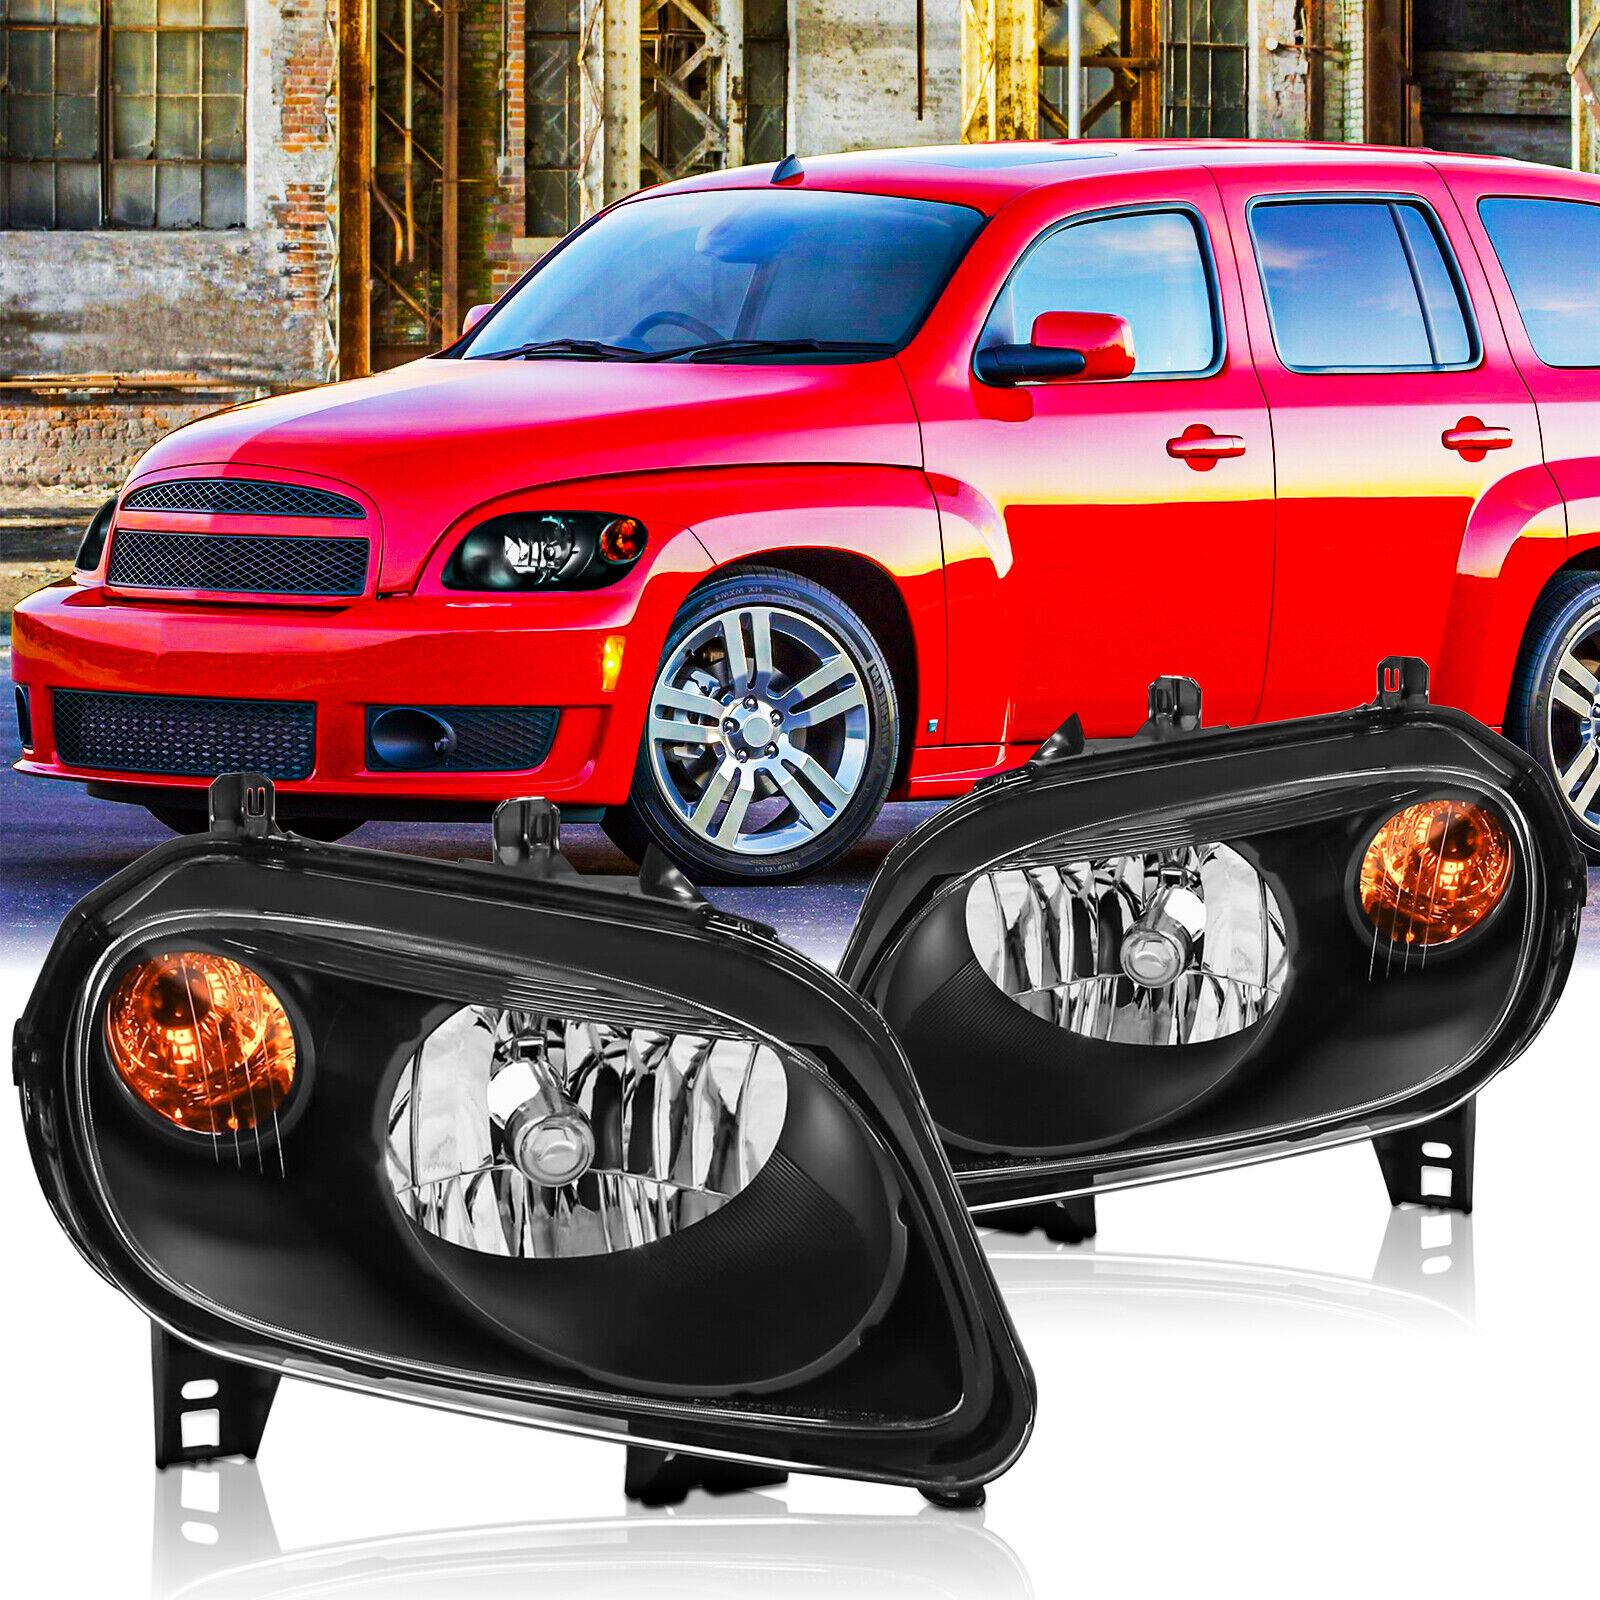 For 2006-2011 Chevy HHR Headlights Headlamps Black Housing Pair Left Right